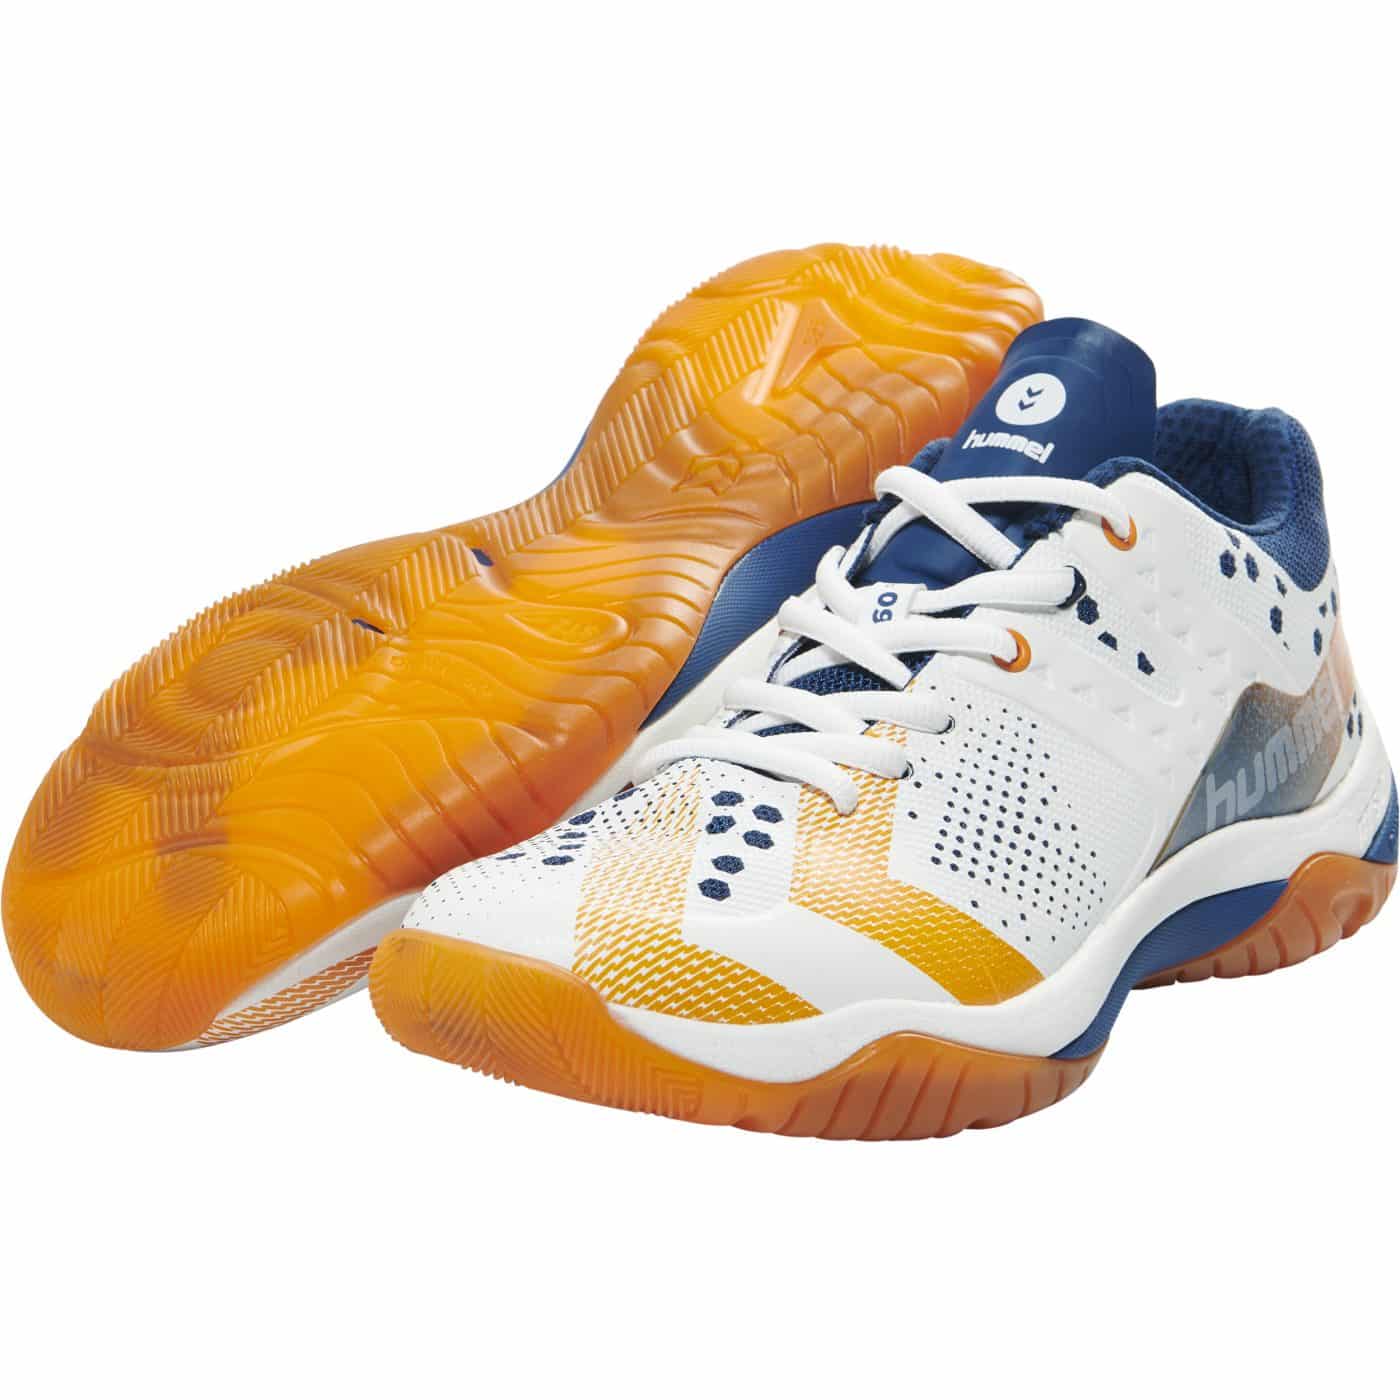 hummel Dual Plate Skill Chaussures Multisport Indoor Mixte Adulte 